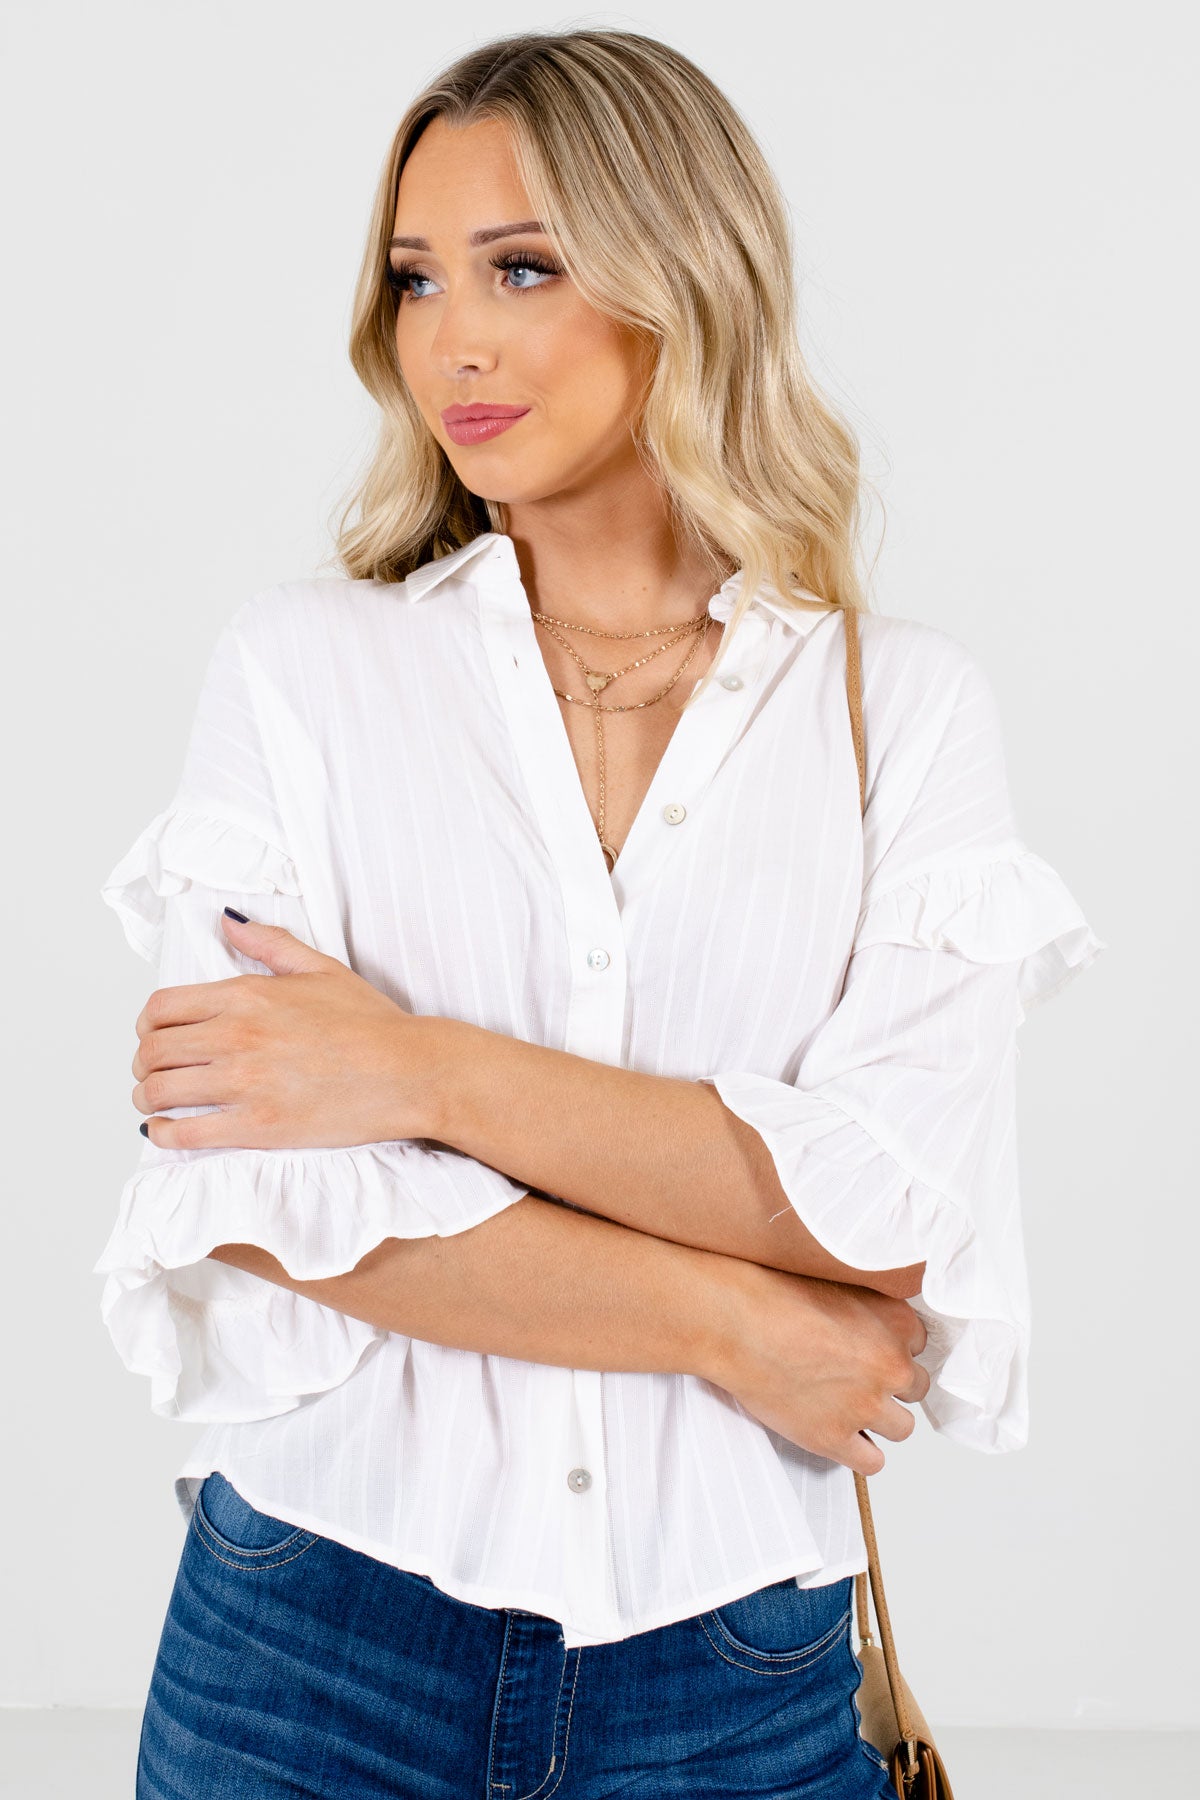 Women's White High-Quality Lightweight Material Boutique Blouse